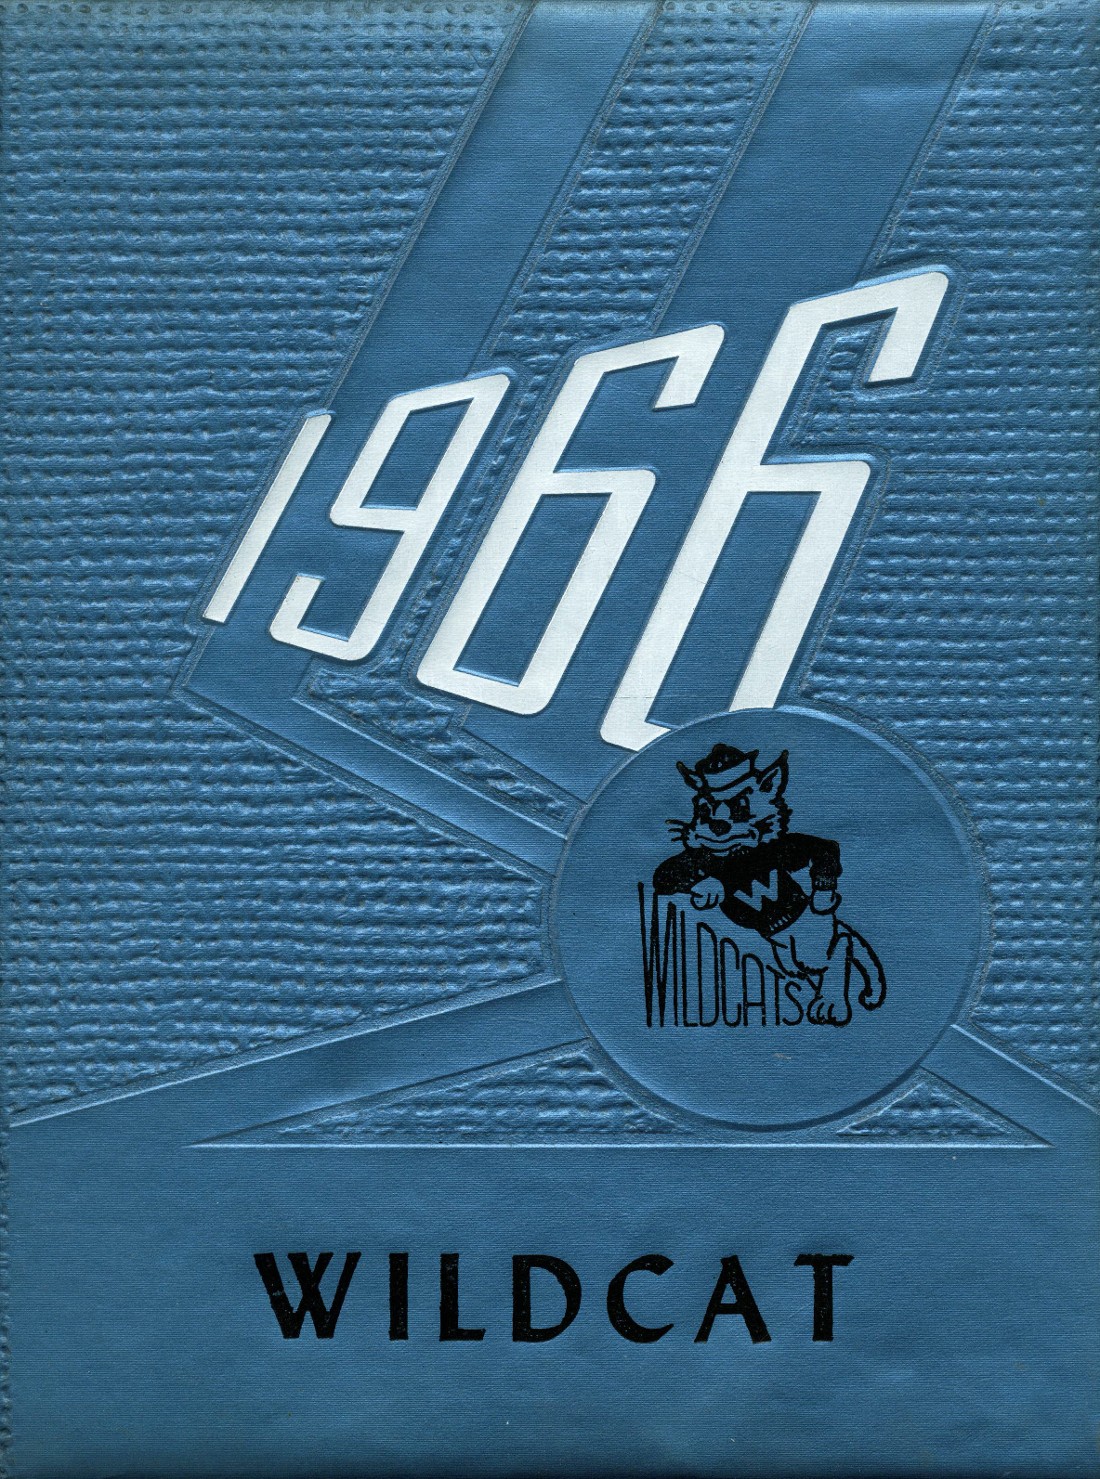 1966 yearbook from Whitehouse High School from Whitehouse, Texas for sale